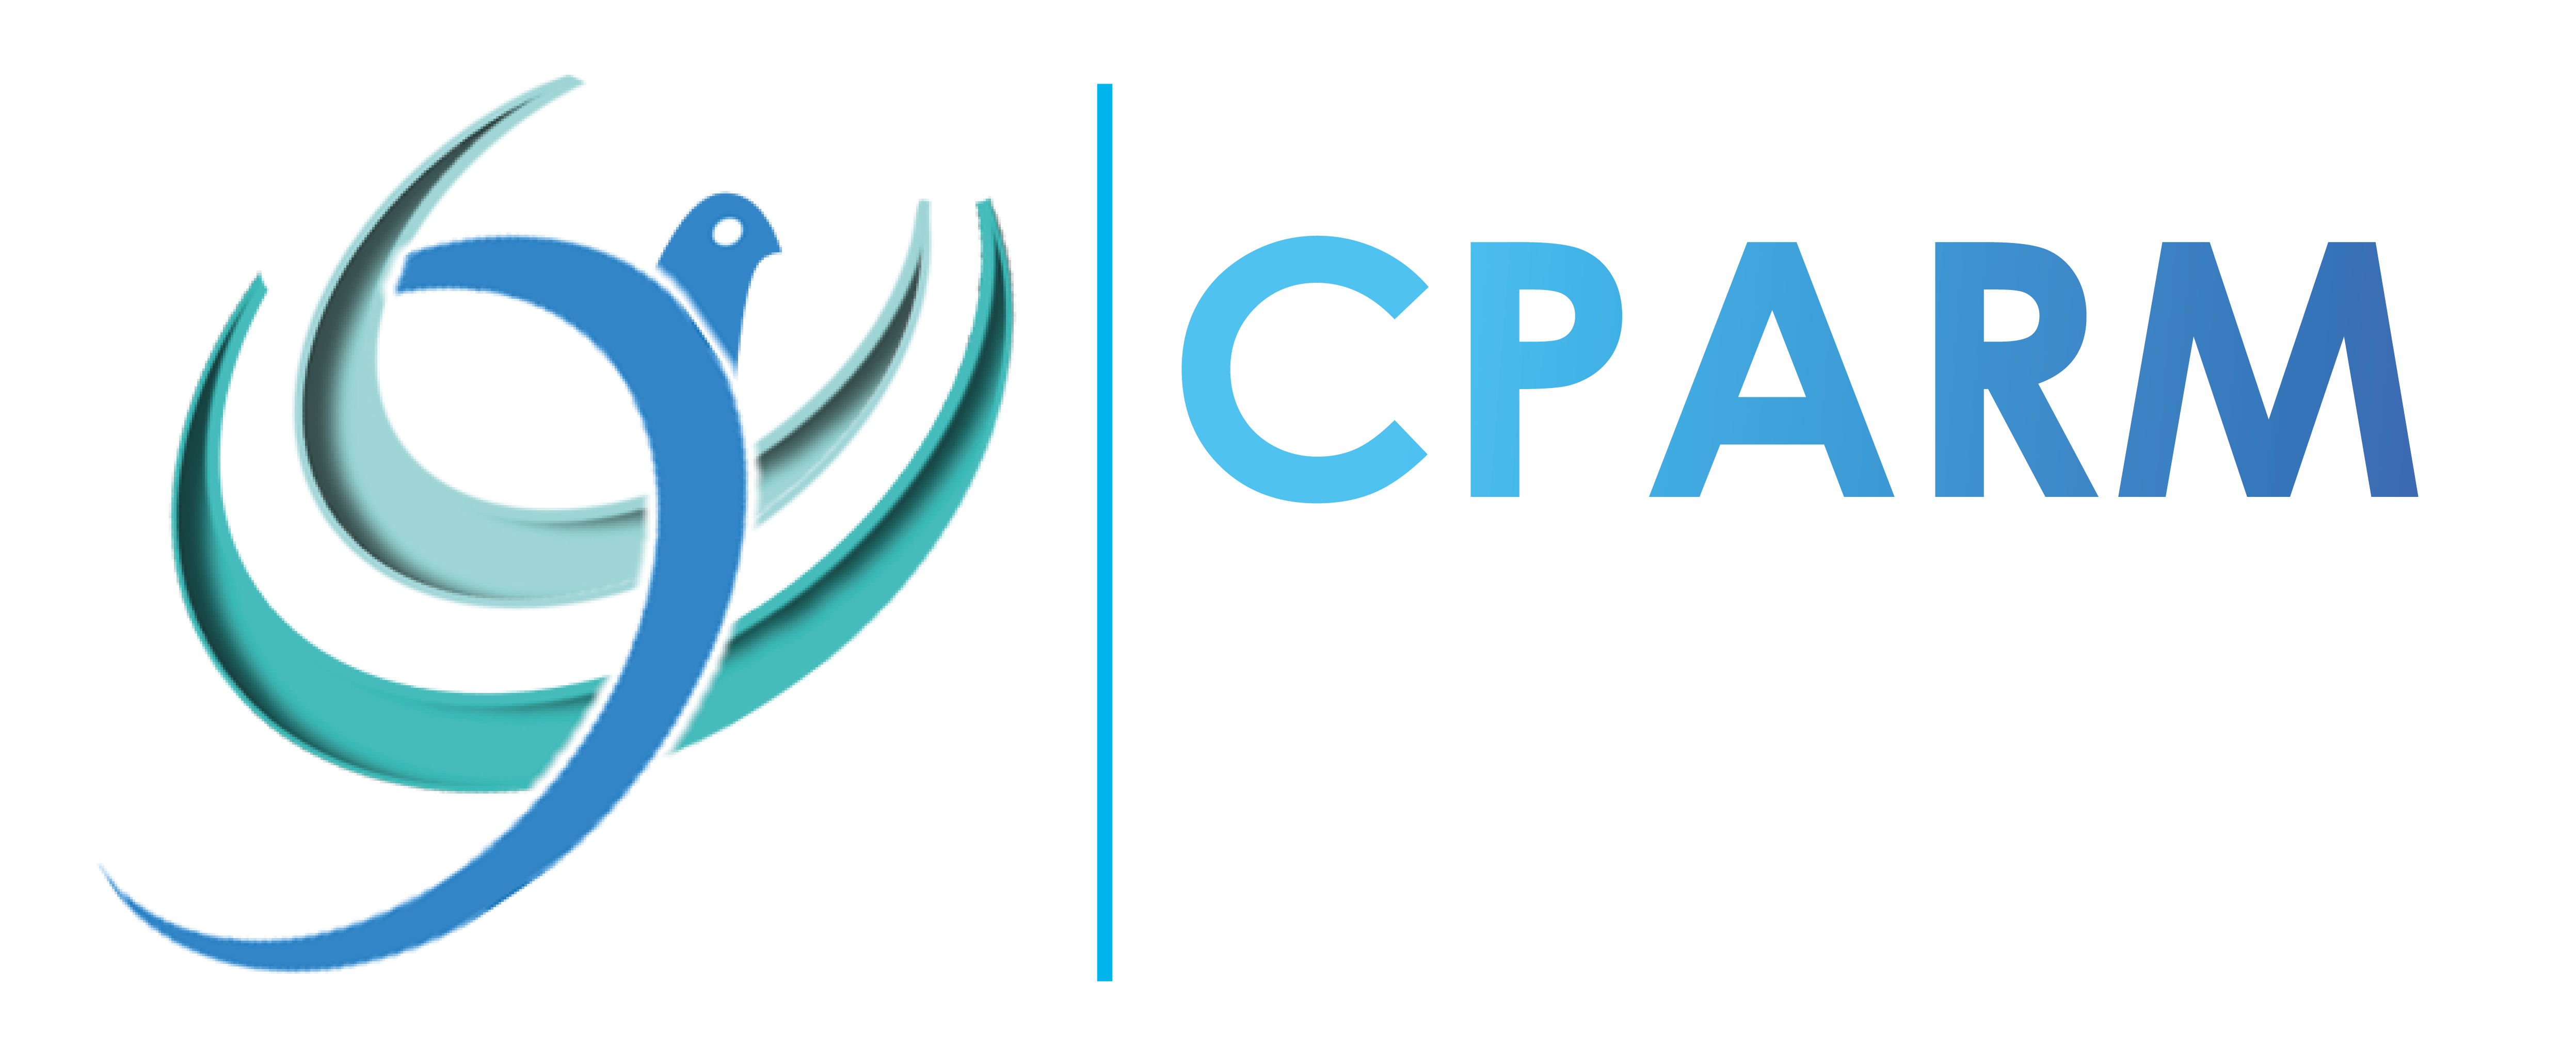 Center for Peace